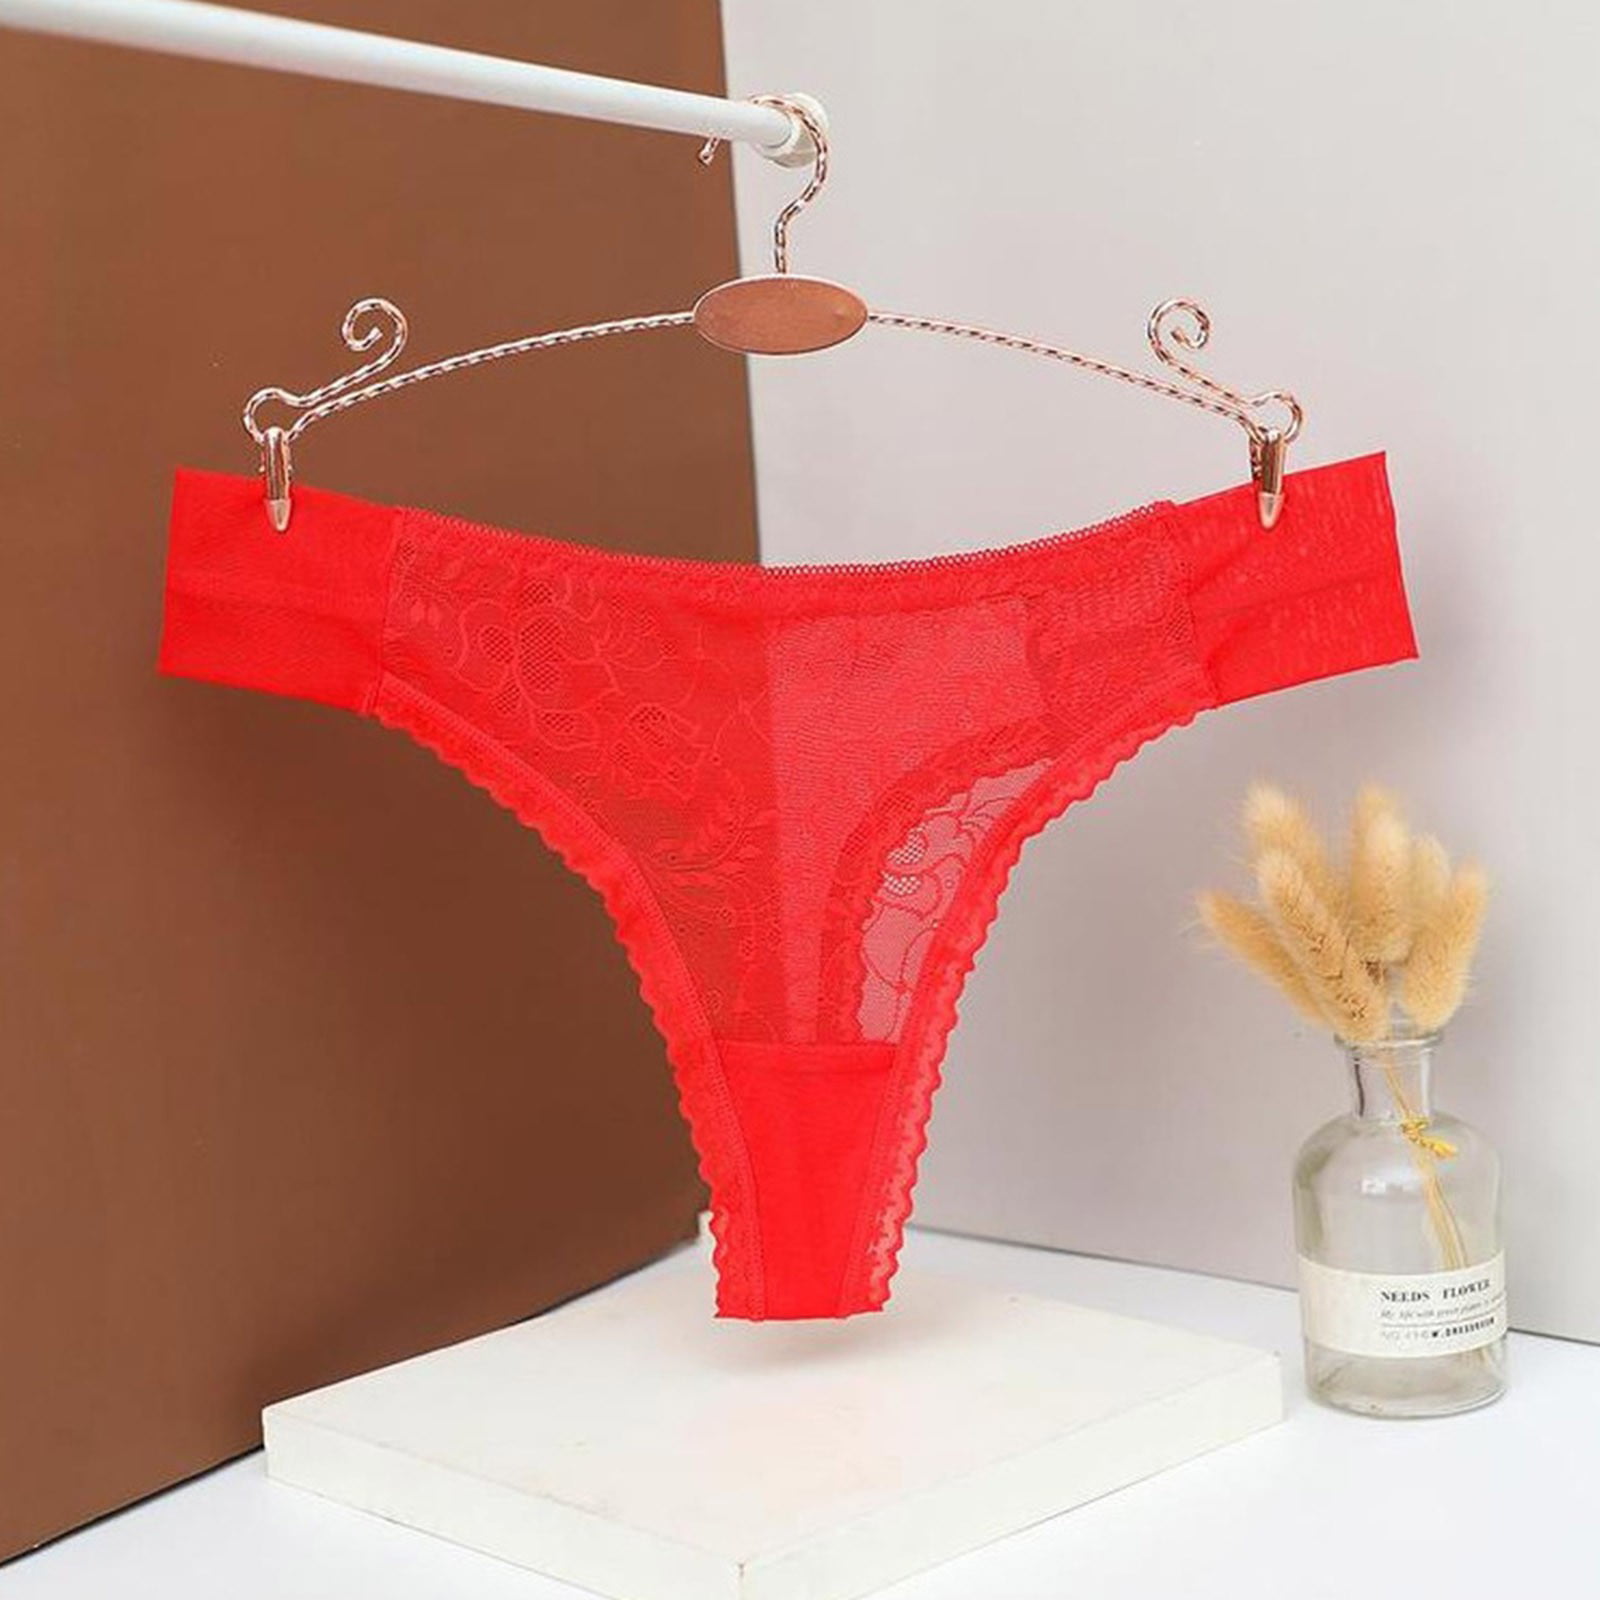 LBECLEY Lane Swim 16 Valentines Day Thong Panties Womens Low Rise Lace  Panties Comfy Thongs Lace Back Panties for Women Plus Size Red Xxl 